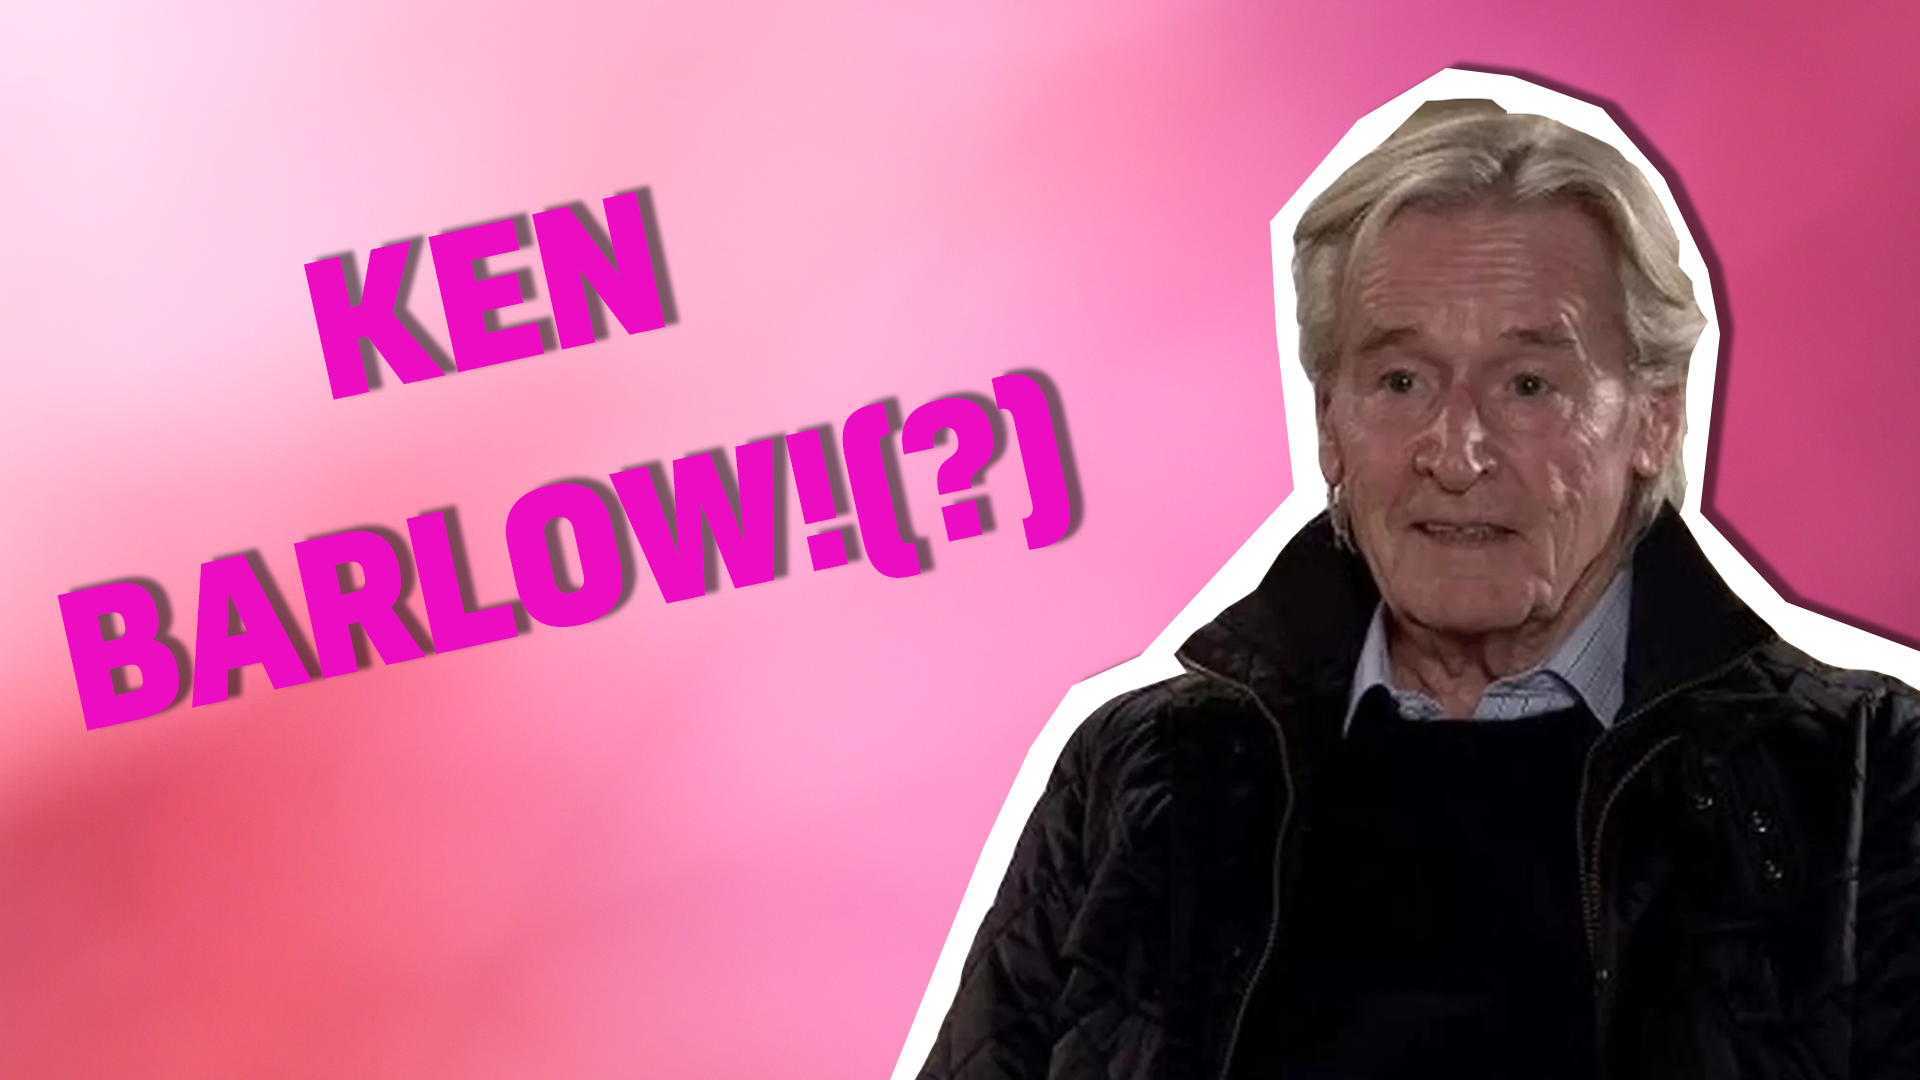 Er, it appears that you are Coronation Street's Ken Barlow! You'd rather be in the Rover's Return than at a party!